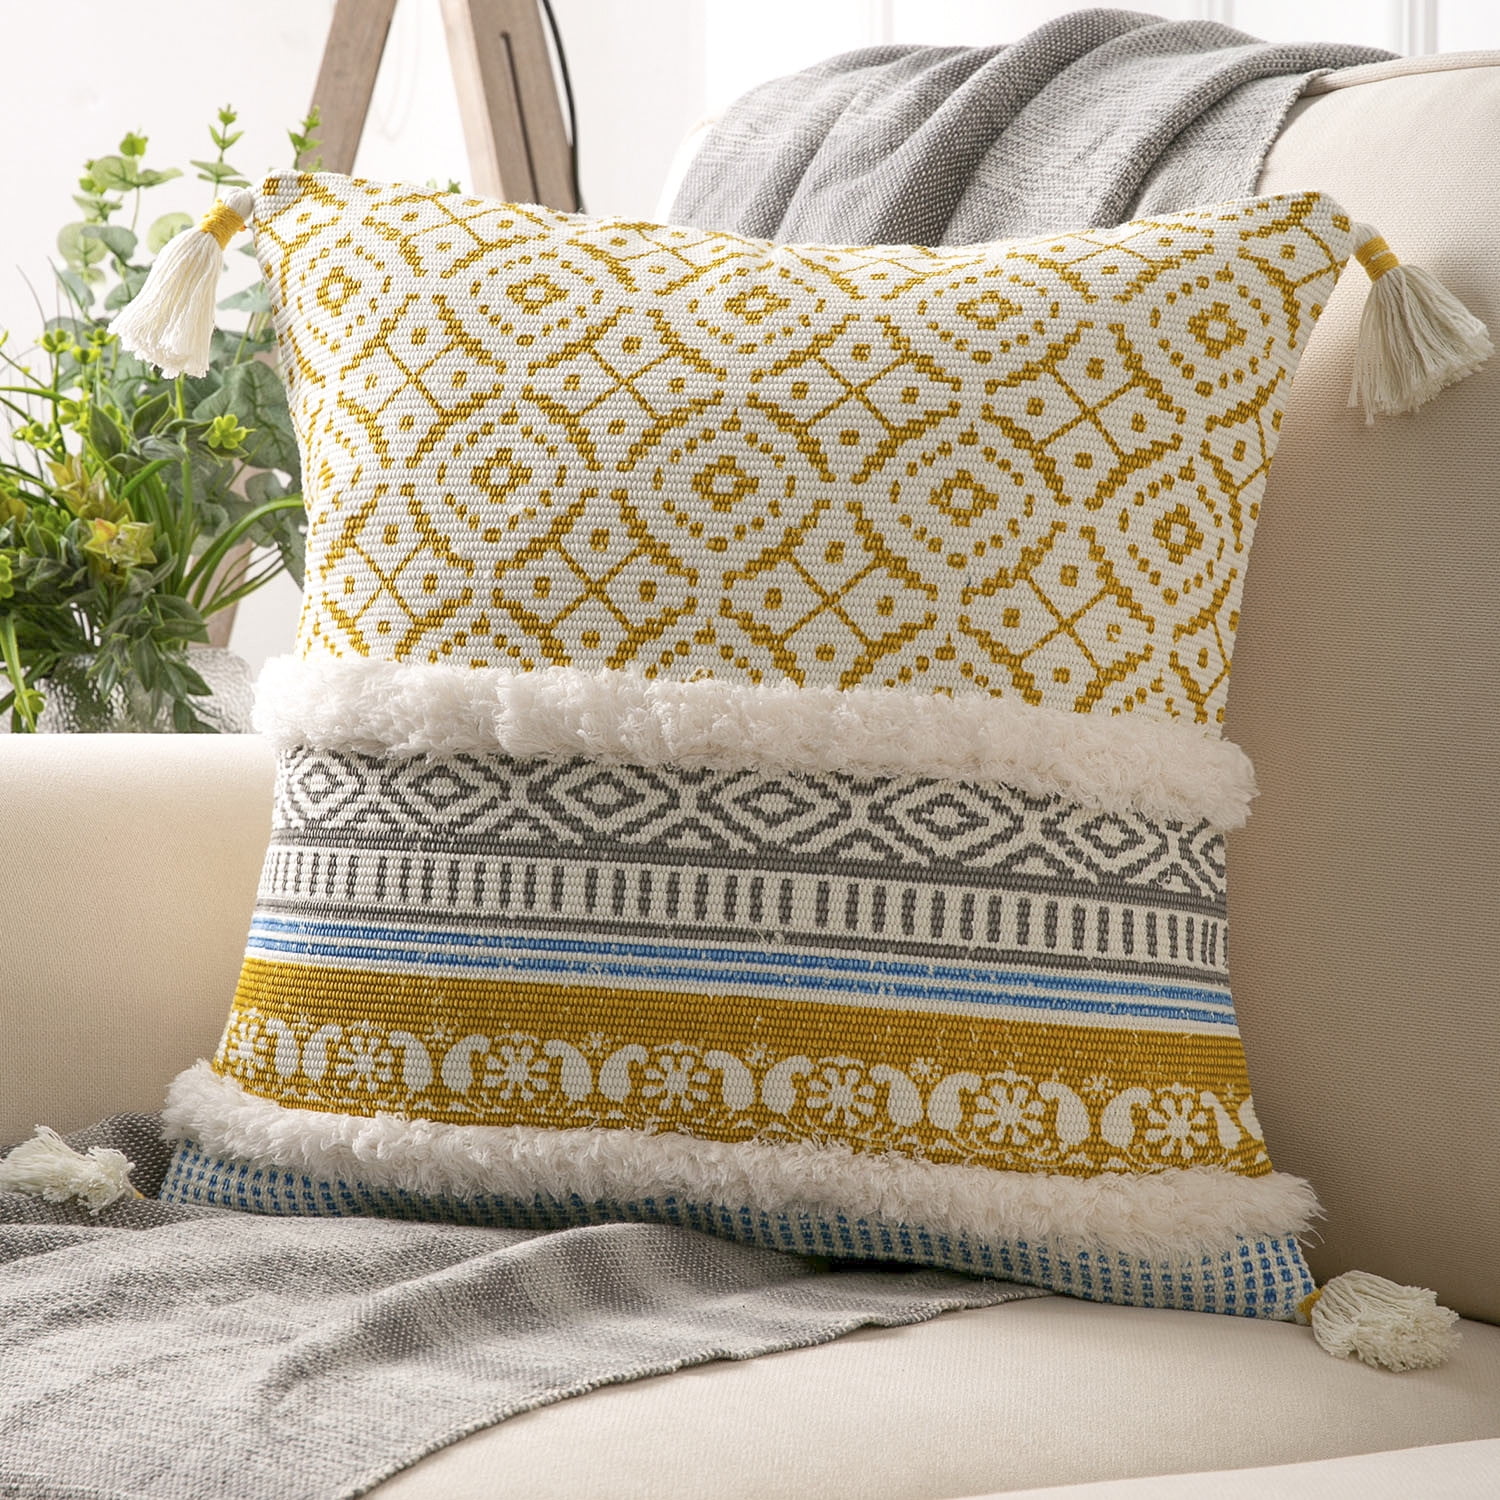 New Upholstered Throw Pillow Pair 18x18 Cream Charcoal and Yellow Diamond  Design